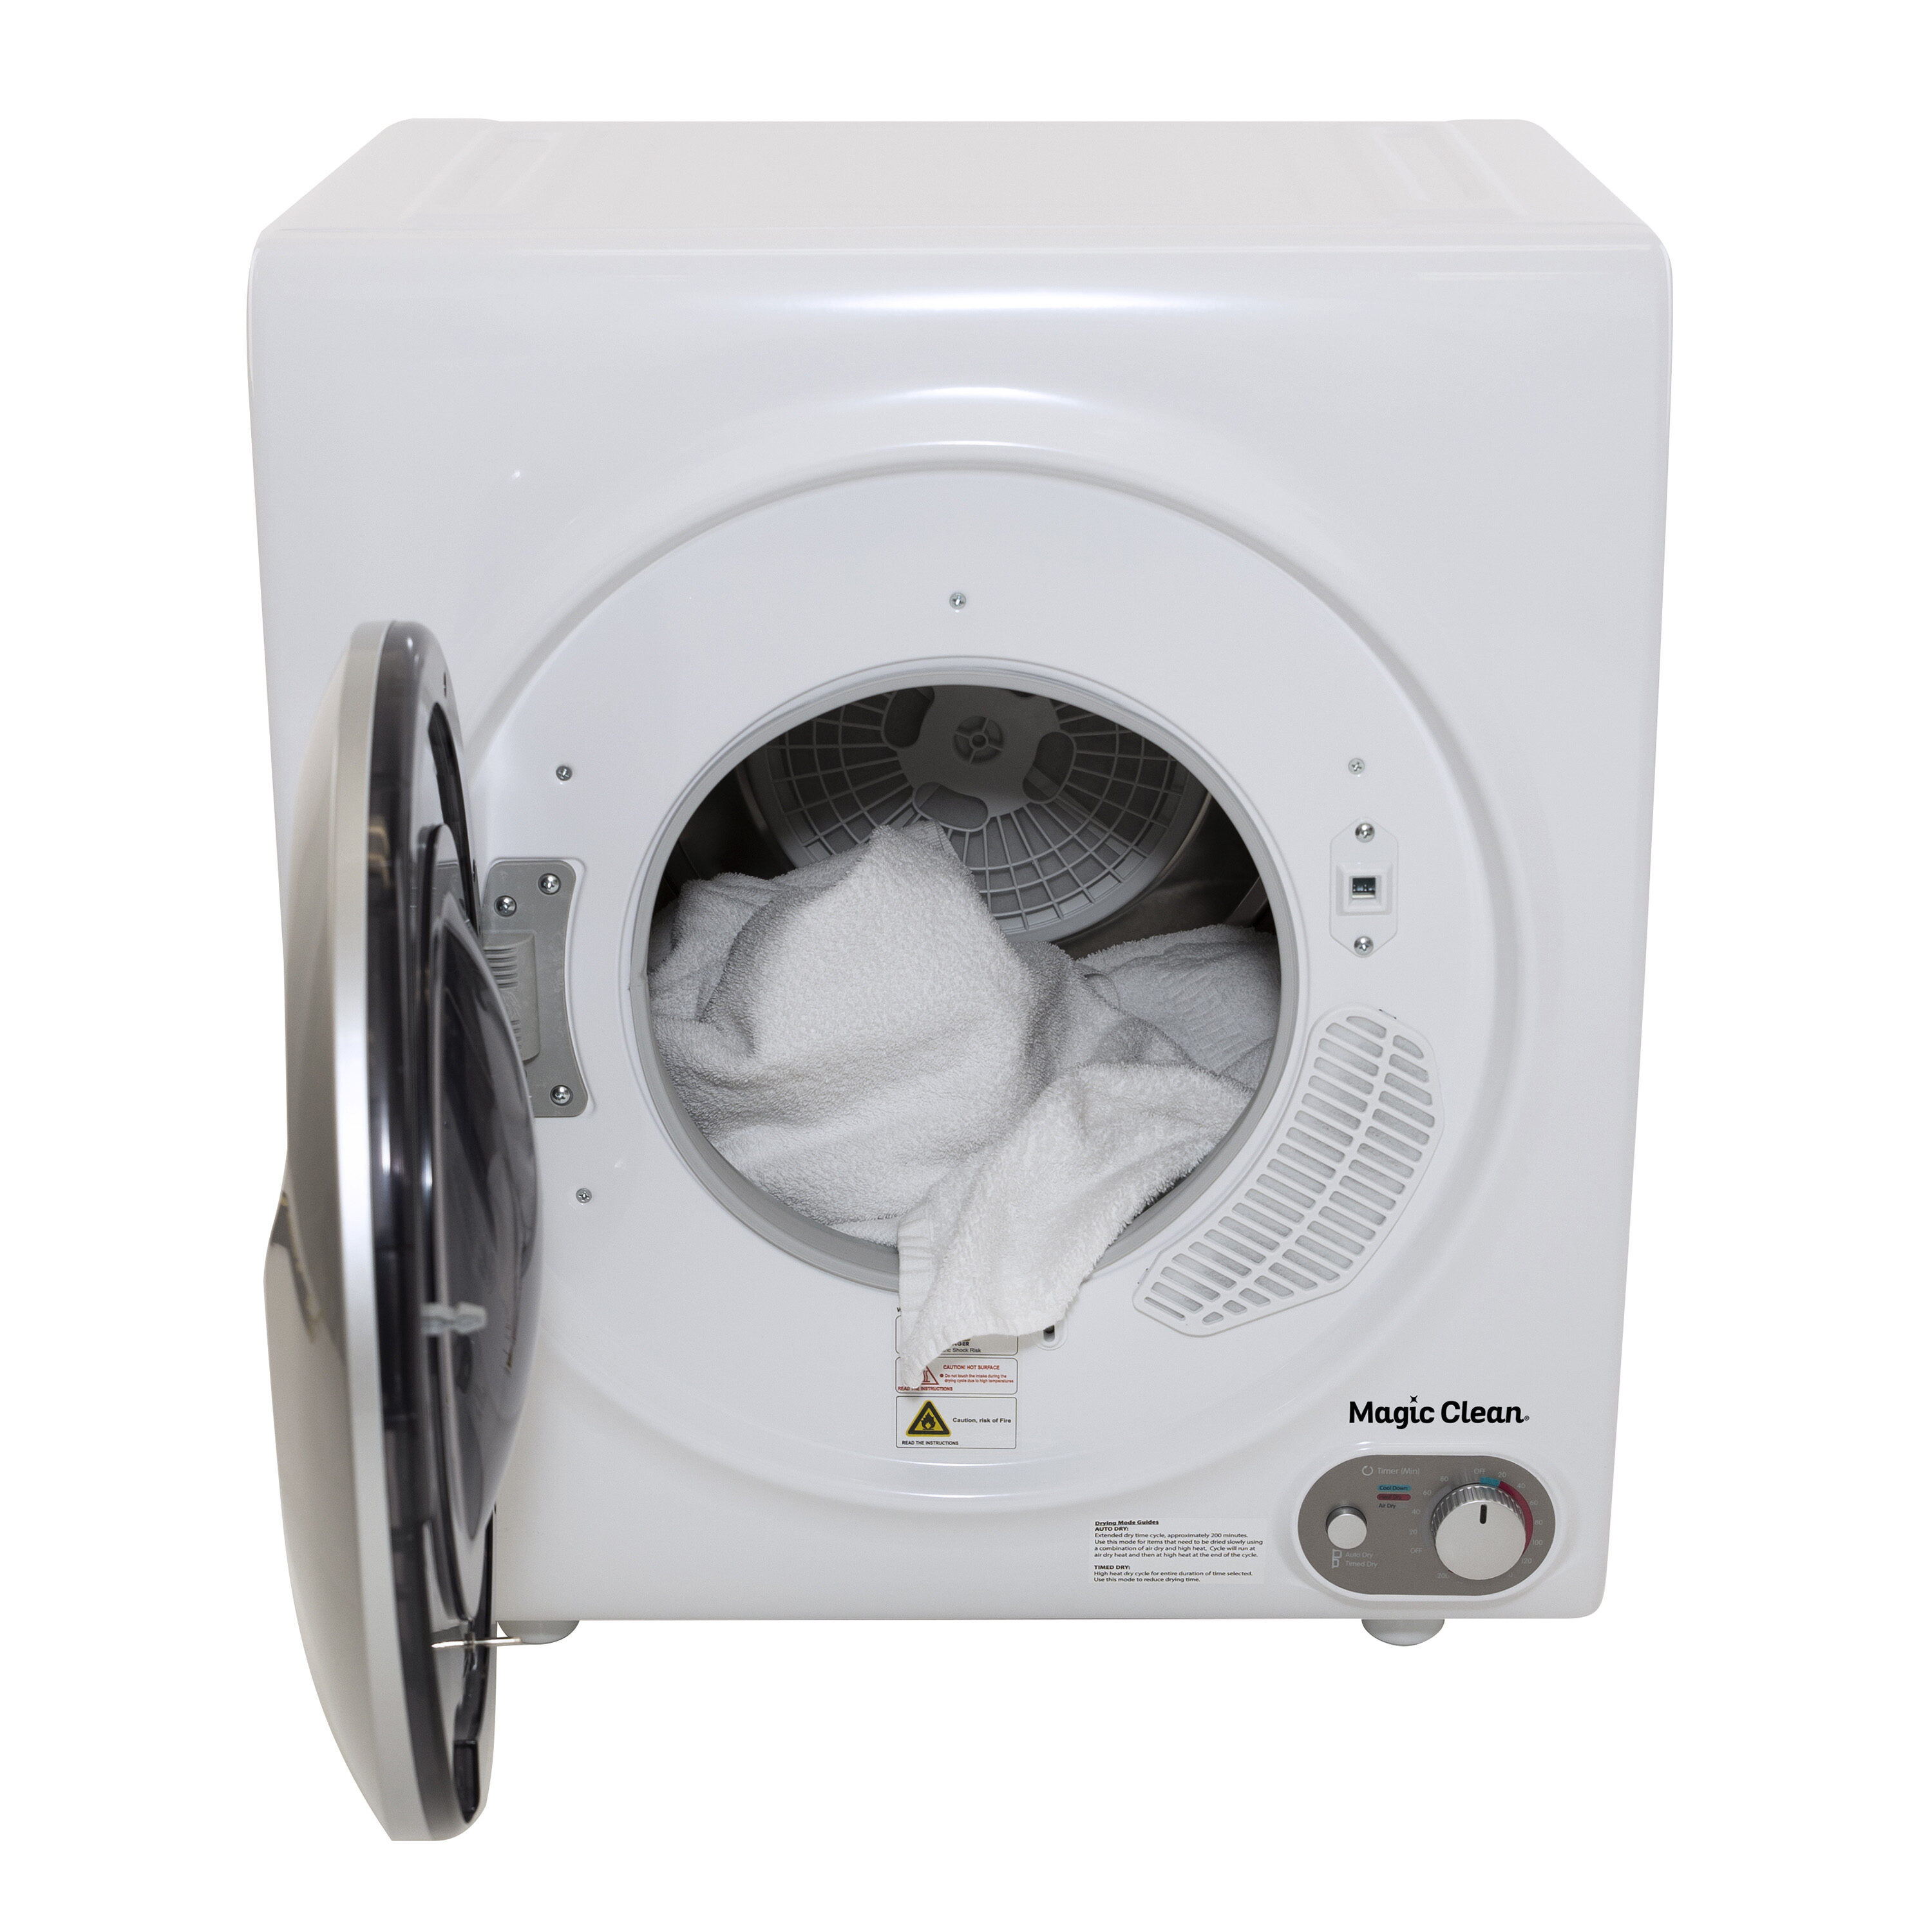 Portable Dryers at